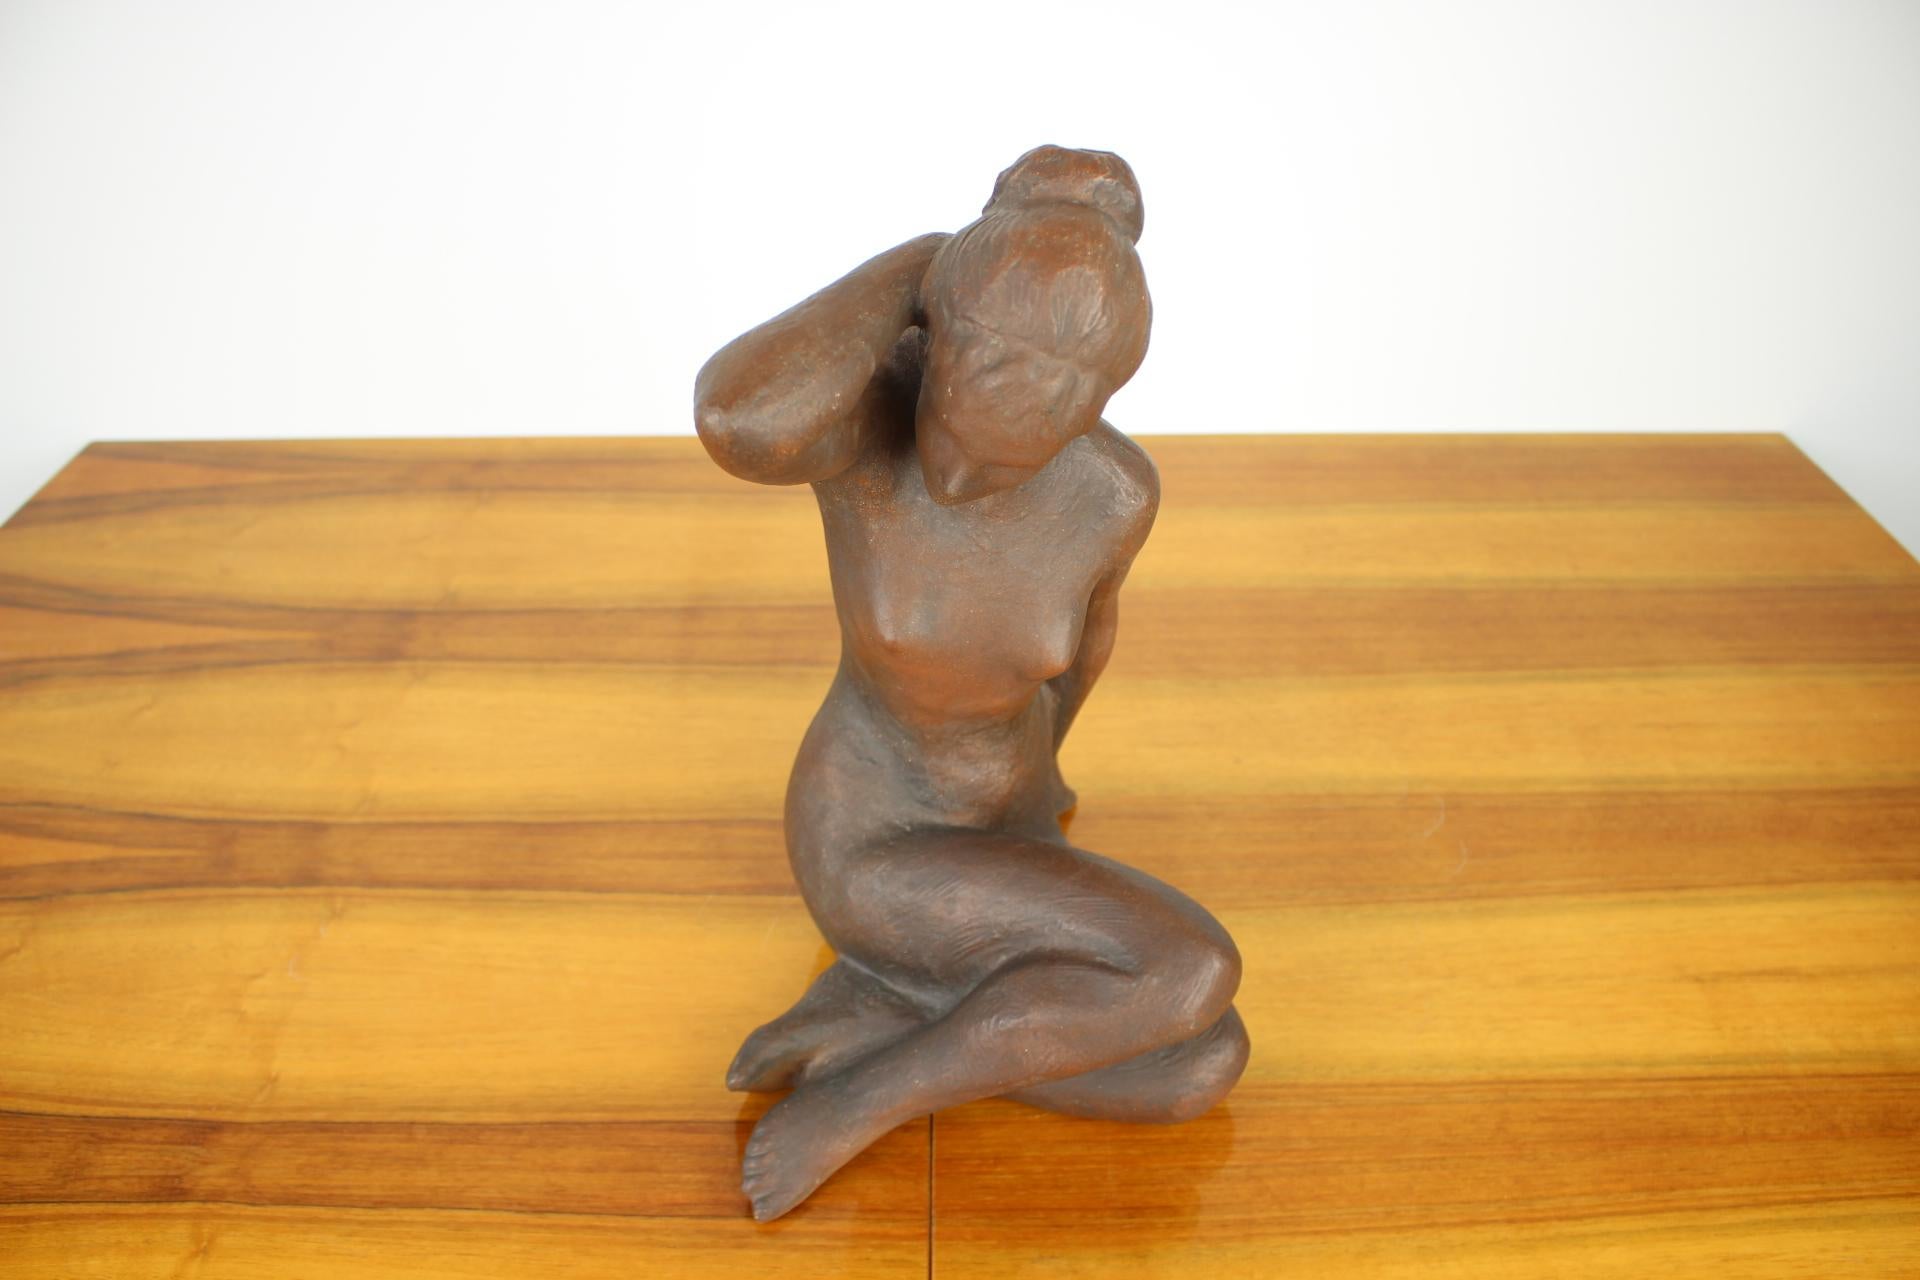 Mid-20th Century Mid-Century Sculpture of Nude Sitting Women Designed by Jitka Forejtová, 1960s